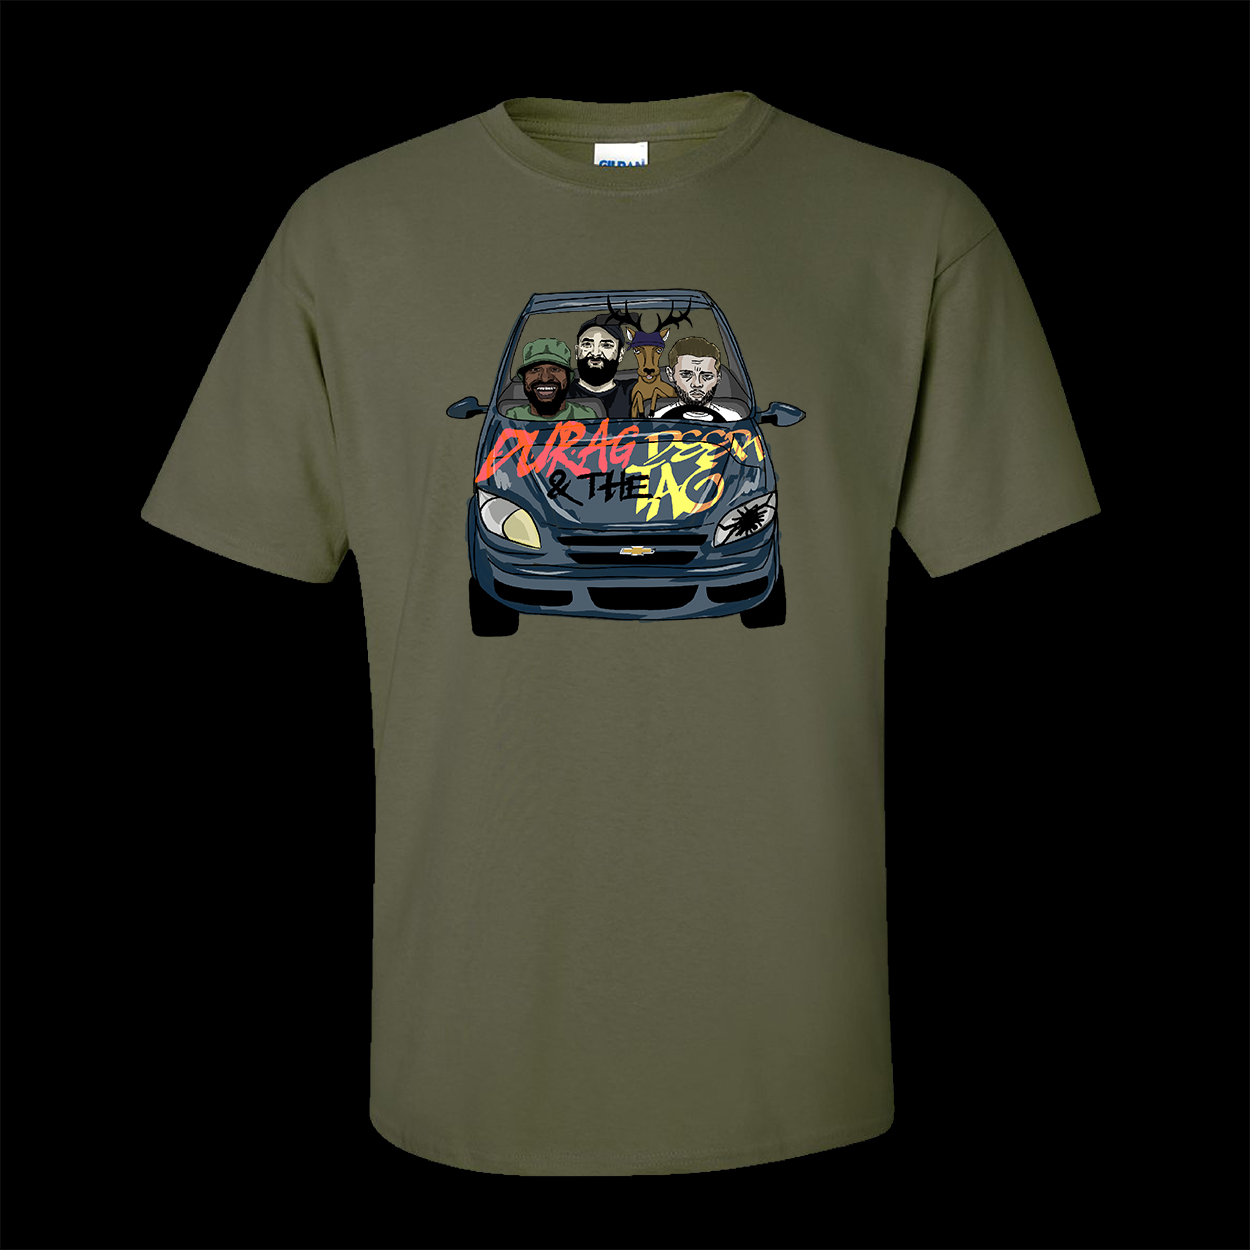 Military green T-shirt from the Durag and the Deer tag Podcast with the Hooptie design